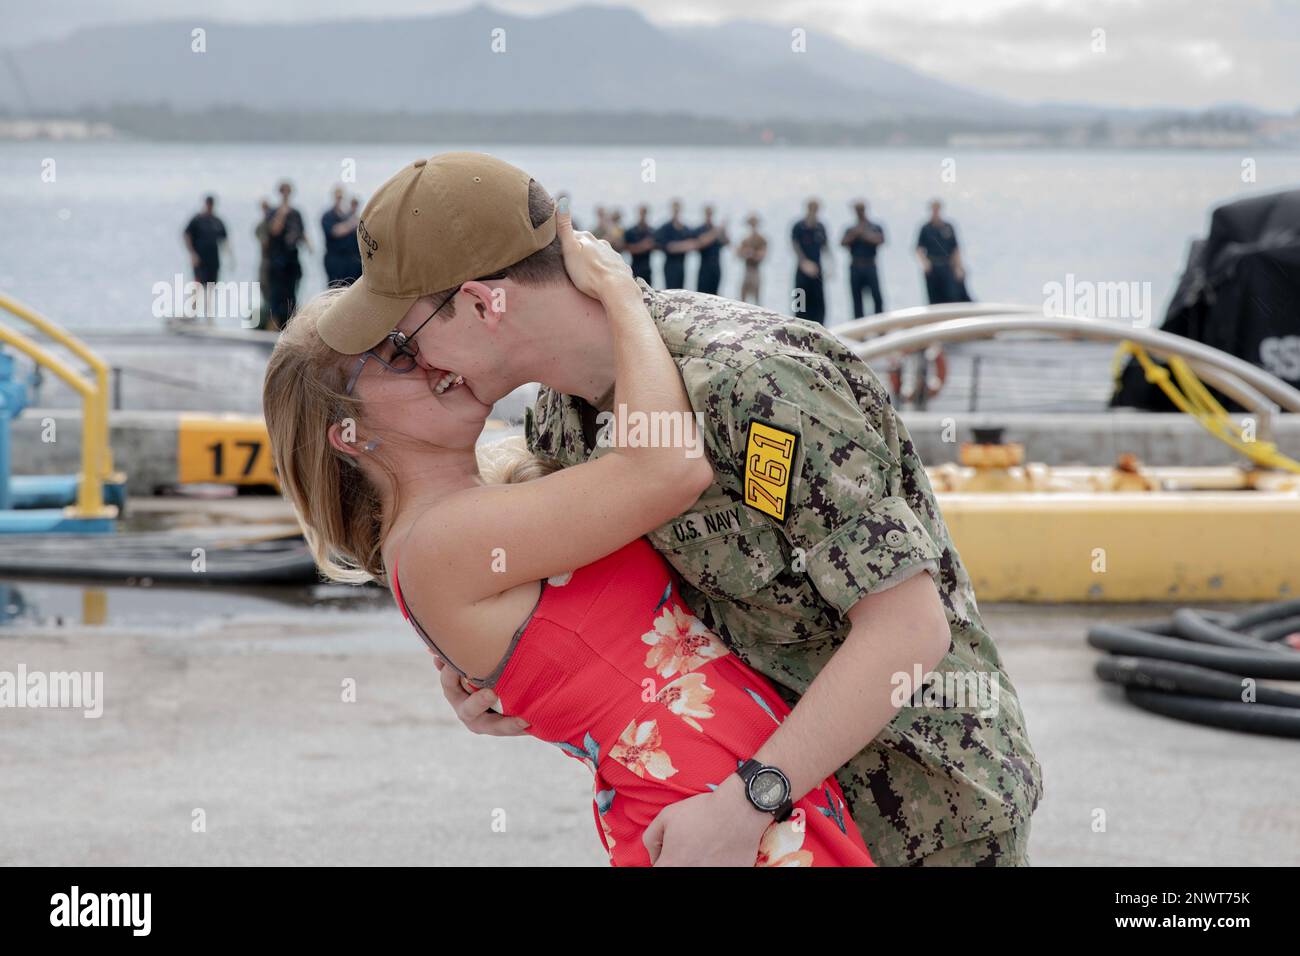 POLARIS POINT, Guam (Jan. 9, 2023) Lt. j.g. Zachary Cutter kisses his wife following the Los Angeles-class fast-attack submarine USS Springfield’s (SSN 761) return to Naval Base Guam, Jan. 9. Springfield is capable of supporting various missions, including anti-submarine warfare, anti-ship warfare, strike warfare and intelligence, surveillance reconnaissance. Stock Photo